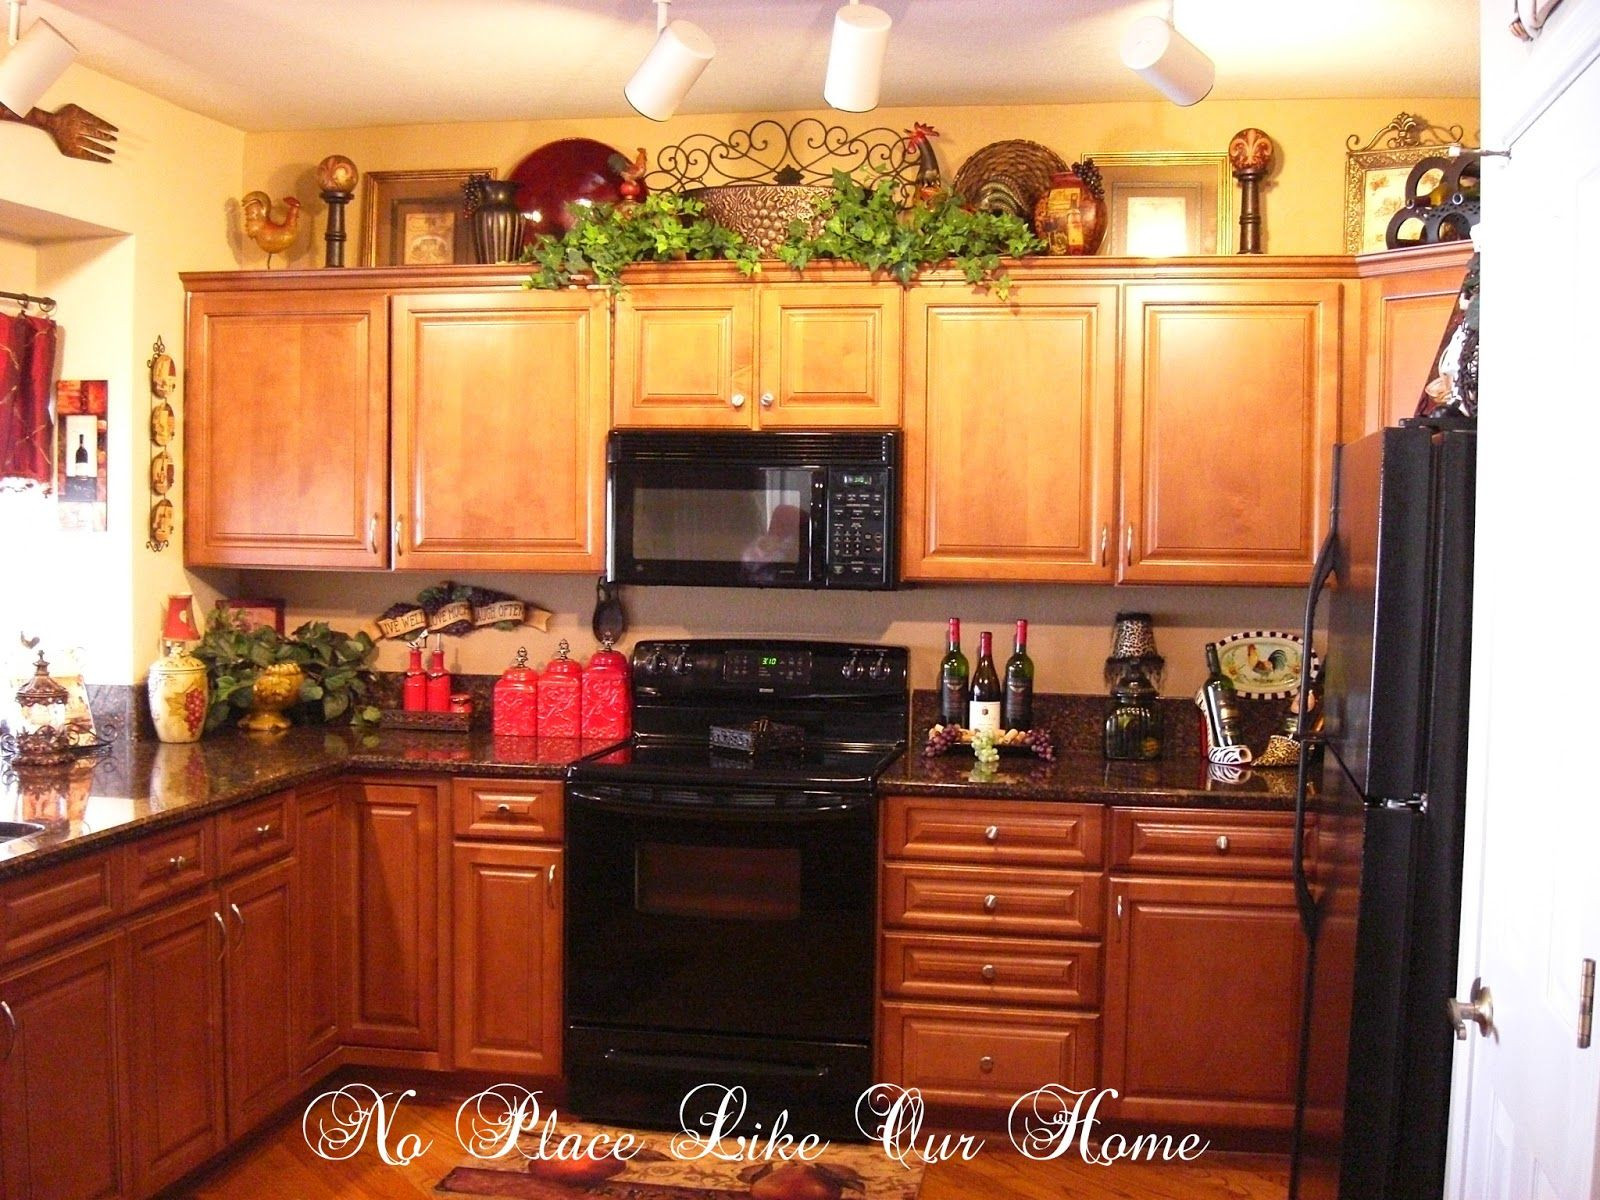 Top Of Kitchen Cabinet Decorations
 decorating above kitchen cabinets tuscany